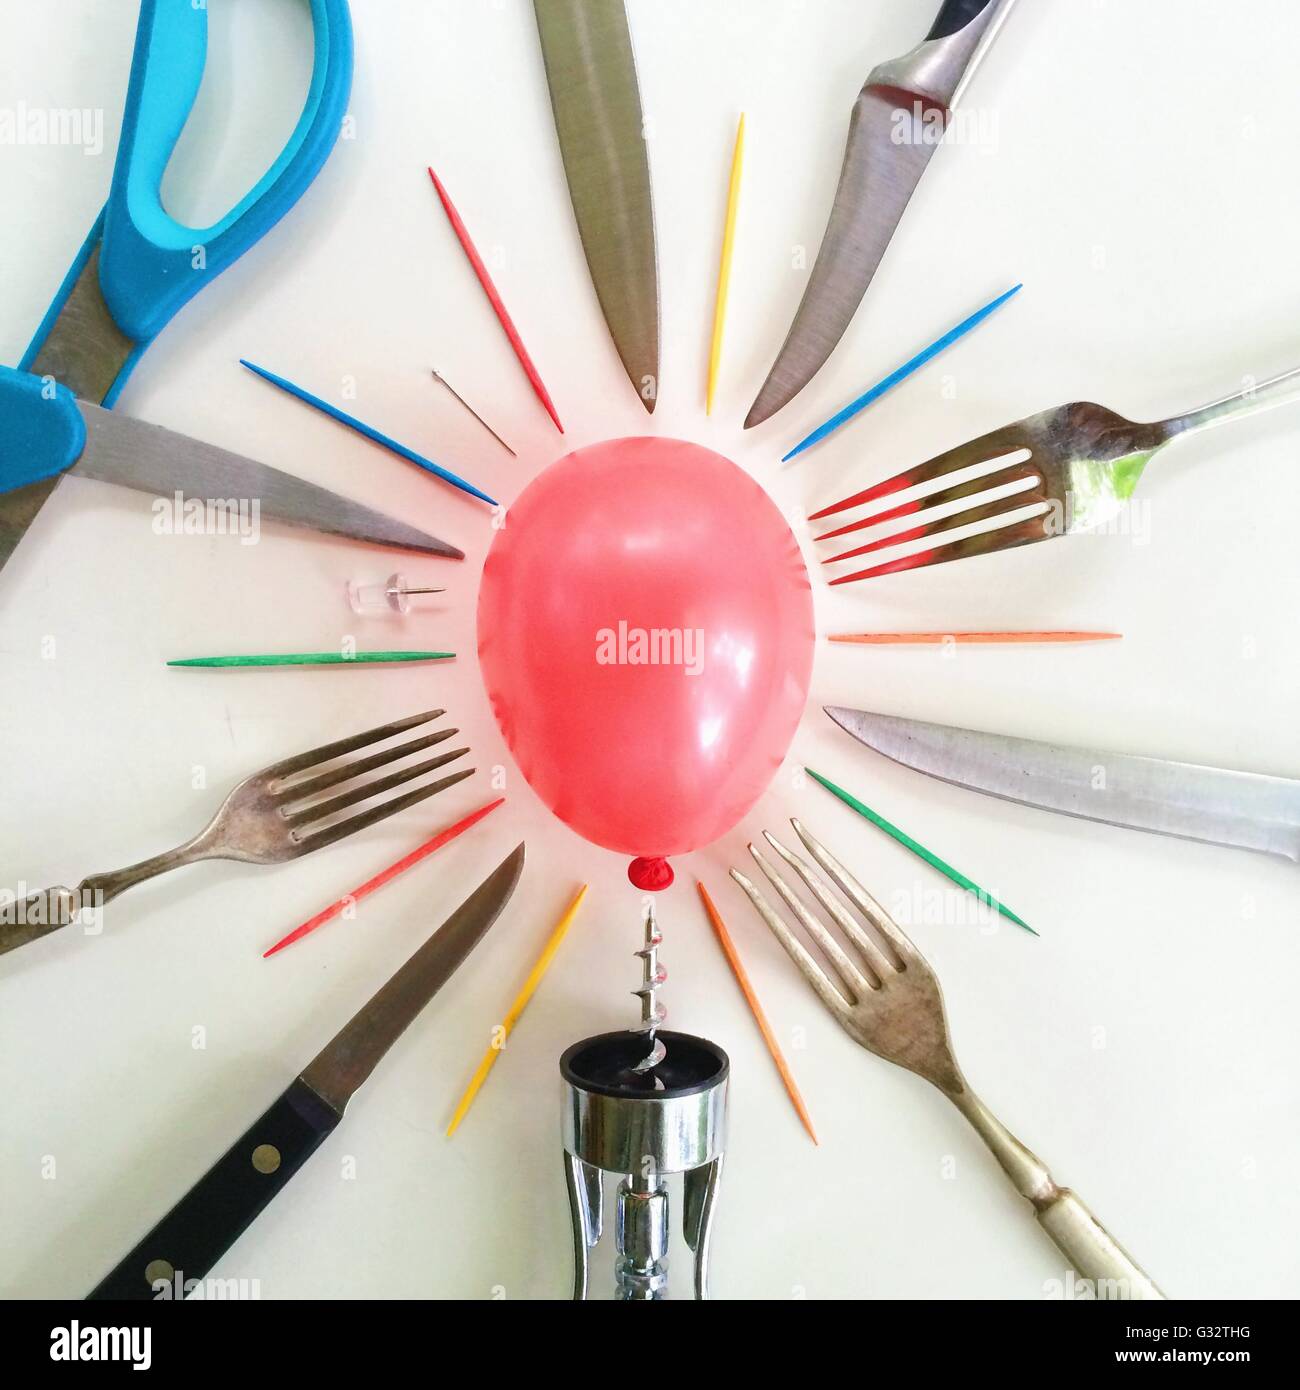 Balloon surrounded by sharp objects Stock Photo